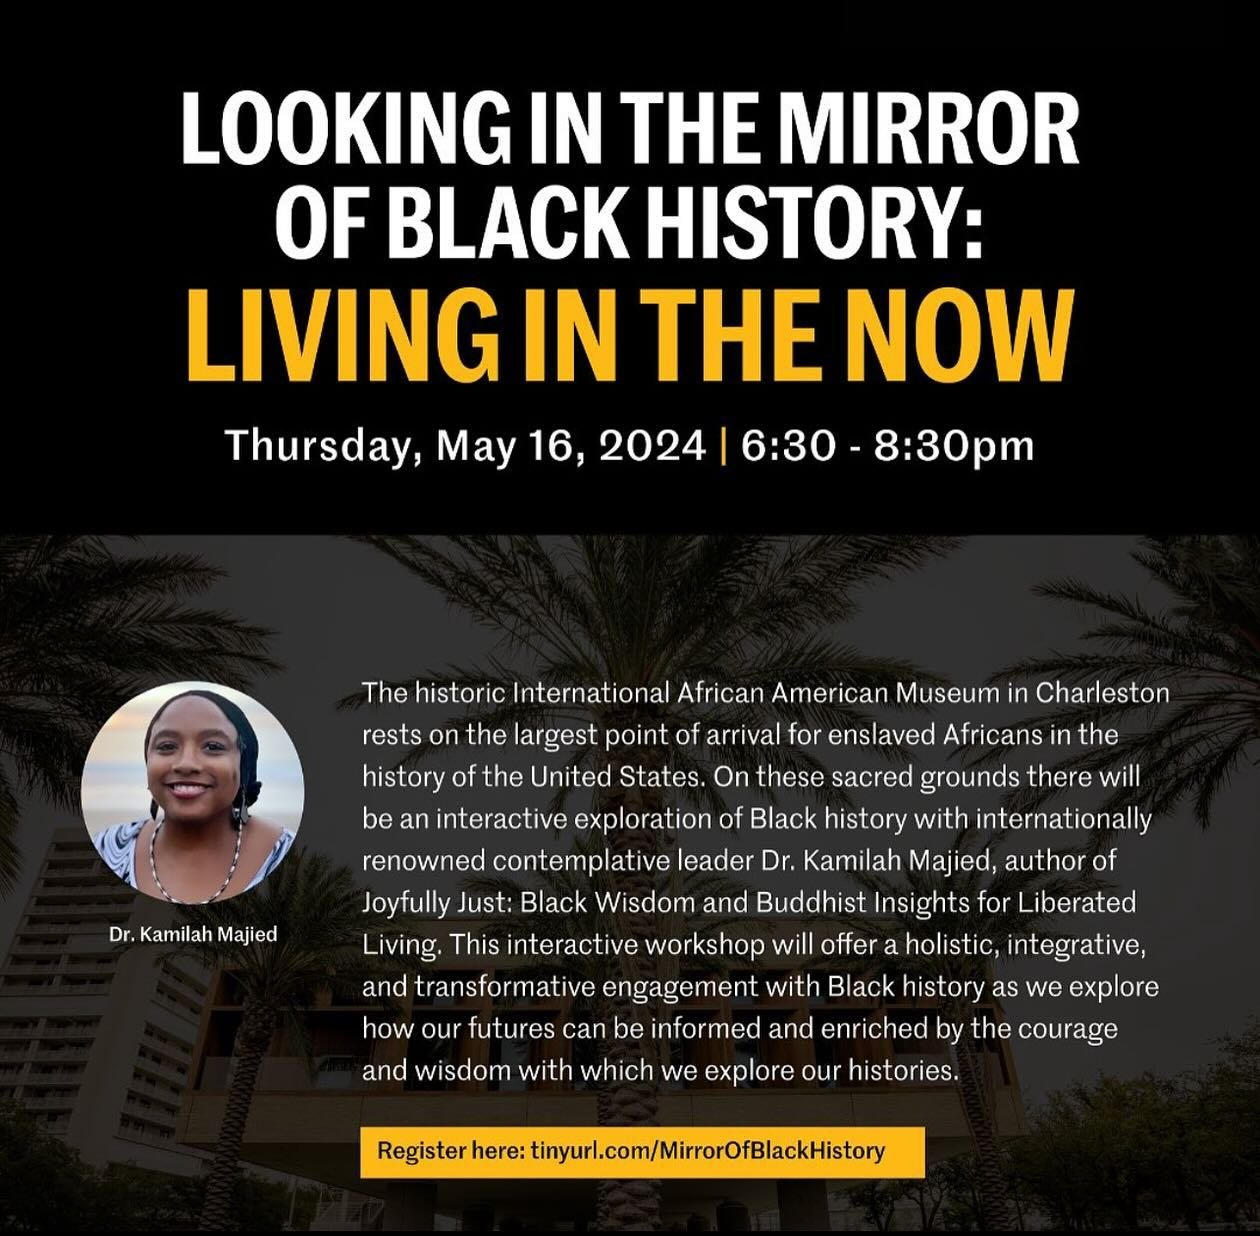 Join me at the magnificent International African American Museum  in Charleston, SC on Thursday, May 16th for &ldquo;Looking in the Mirror of Black History: Living in the Now.&rdquo; This workshop is perfect for anyone seeking a deeper awareness of h